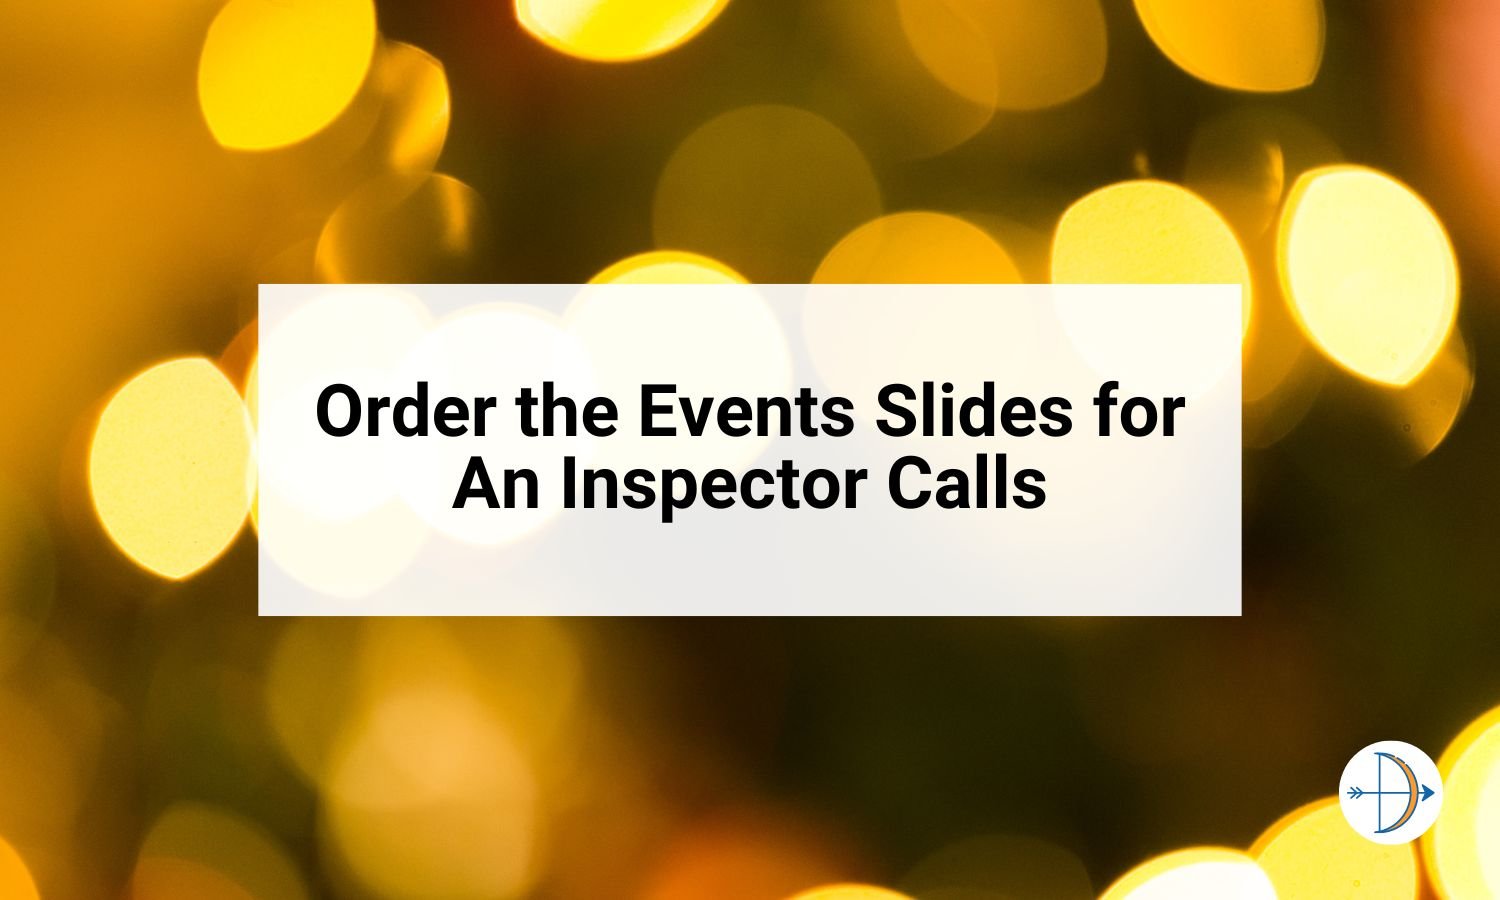 Order the Events Slides for An Inspector Calls